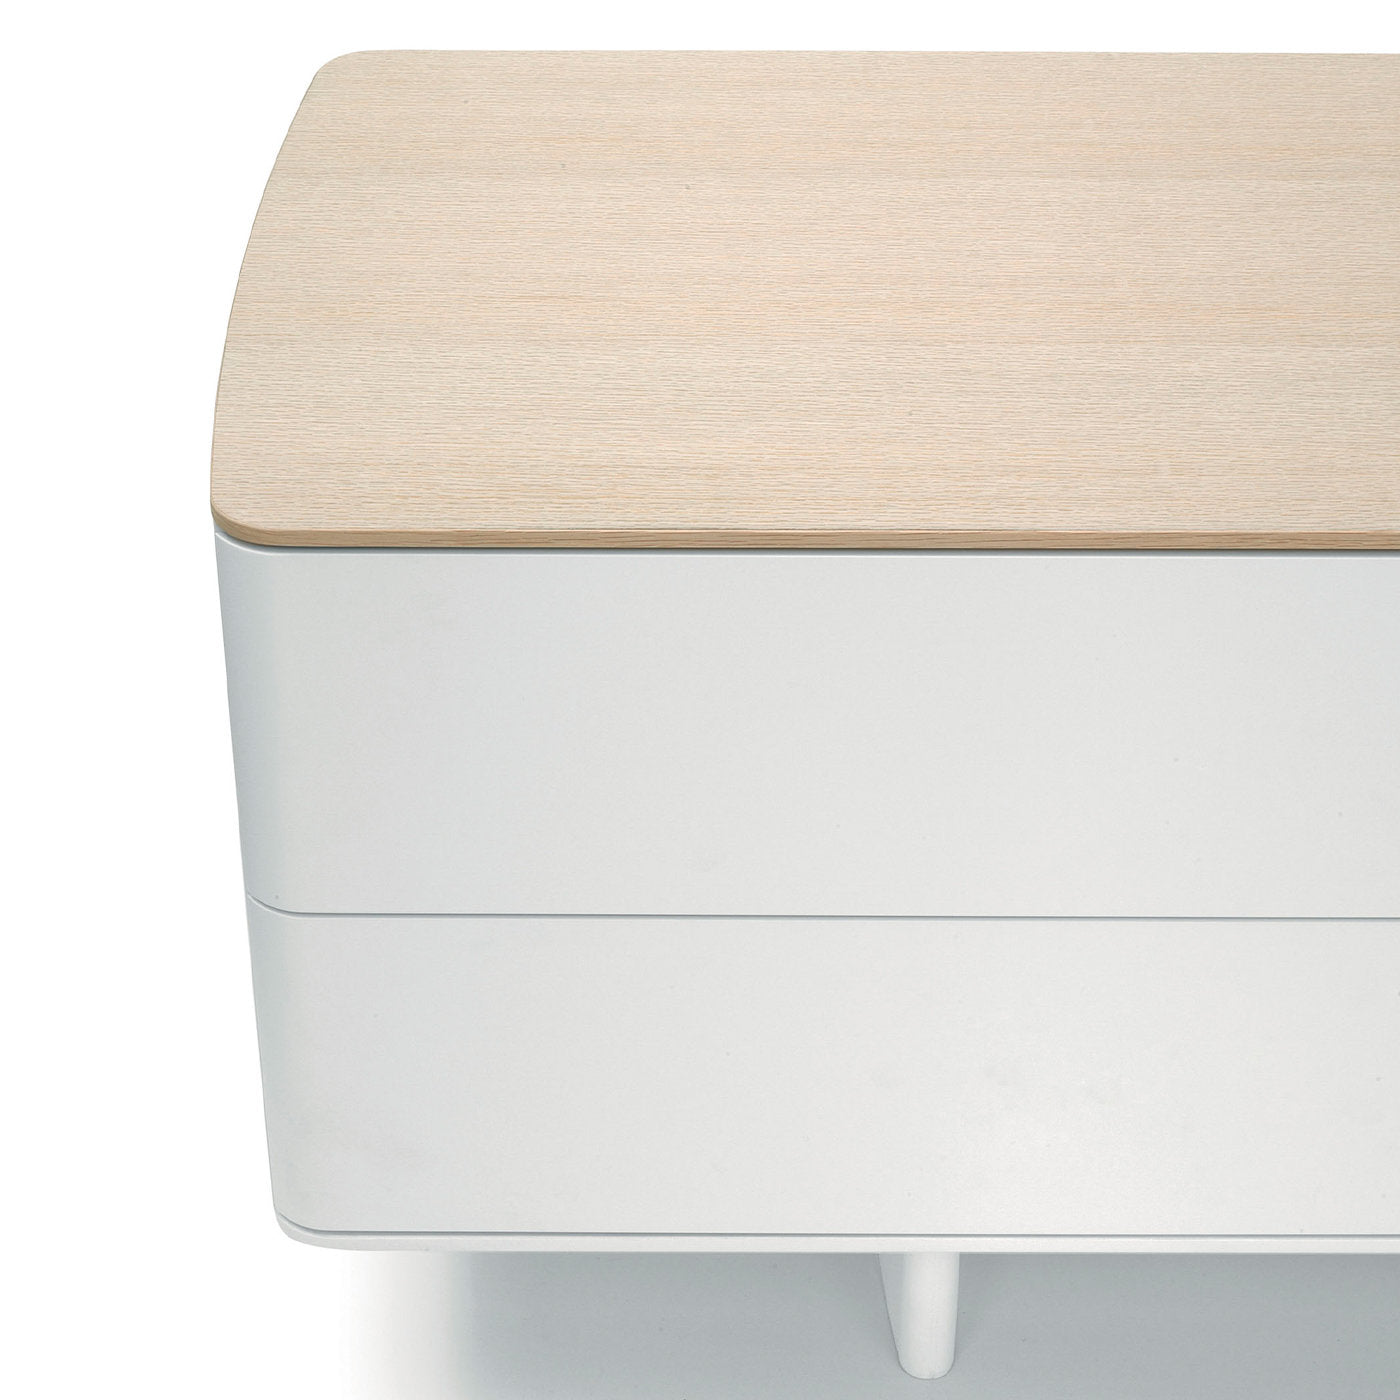 Shift White and Durmast Sideboard by Foster + Partners - Alternative view 2